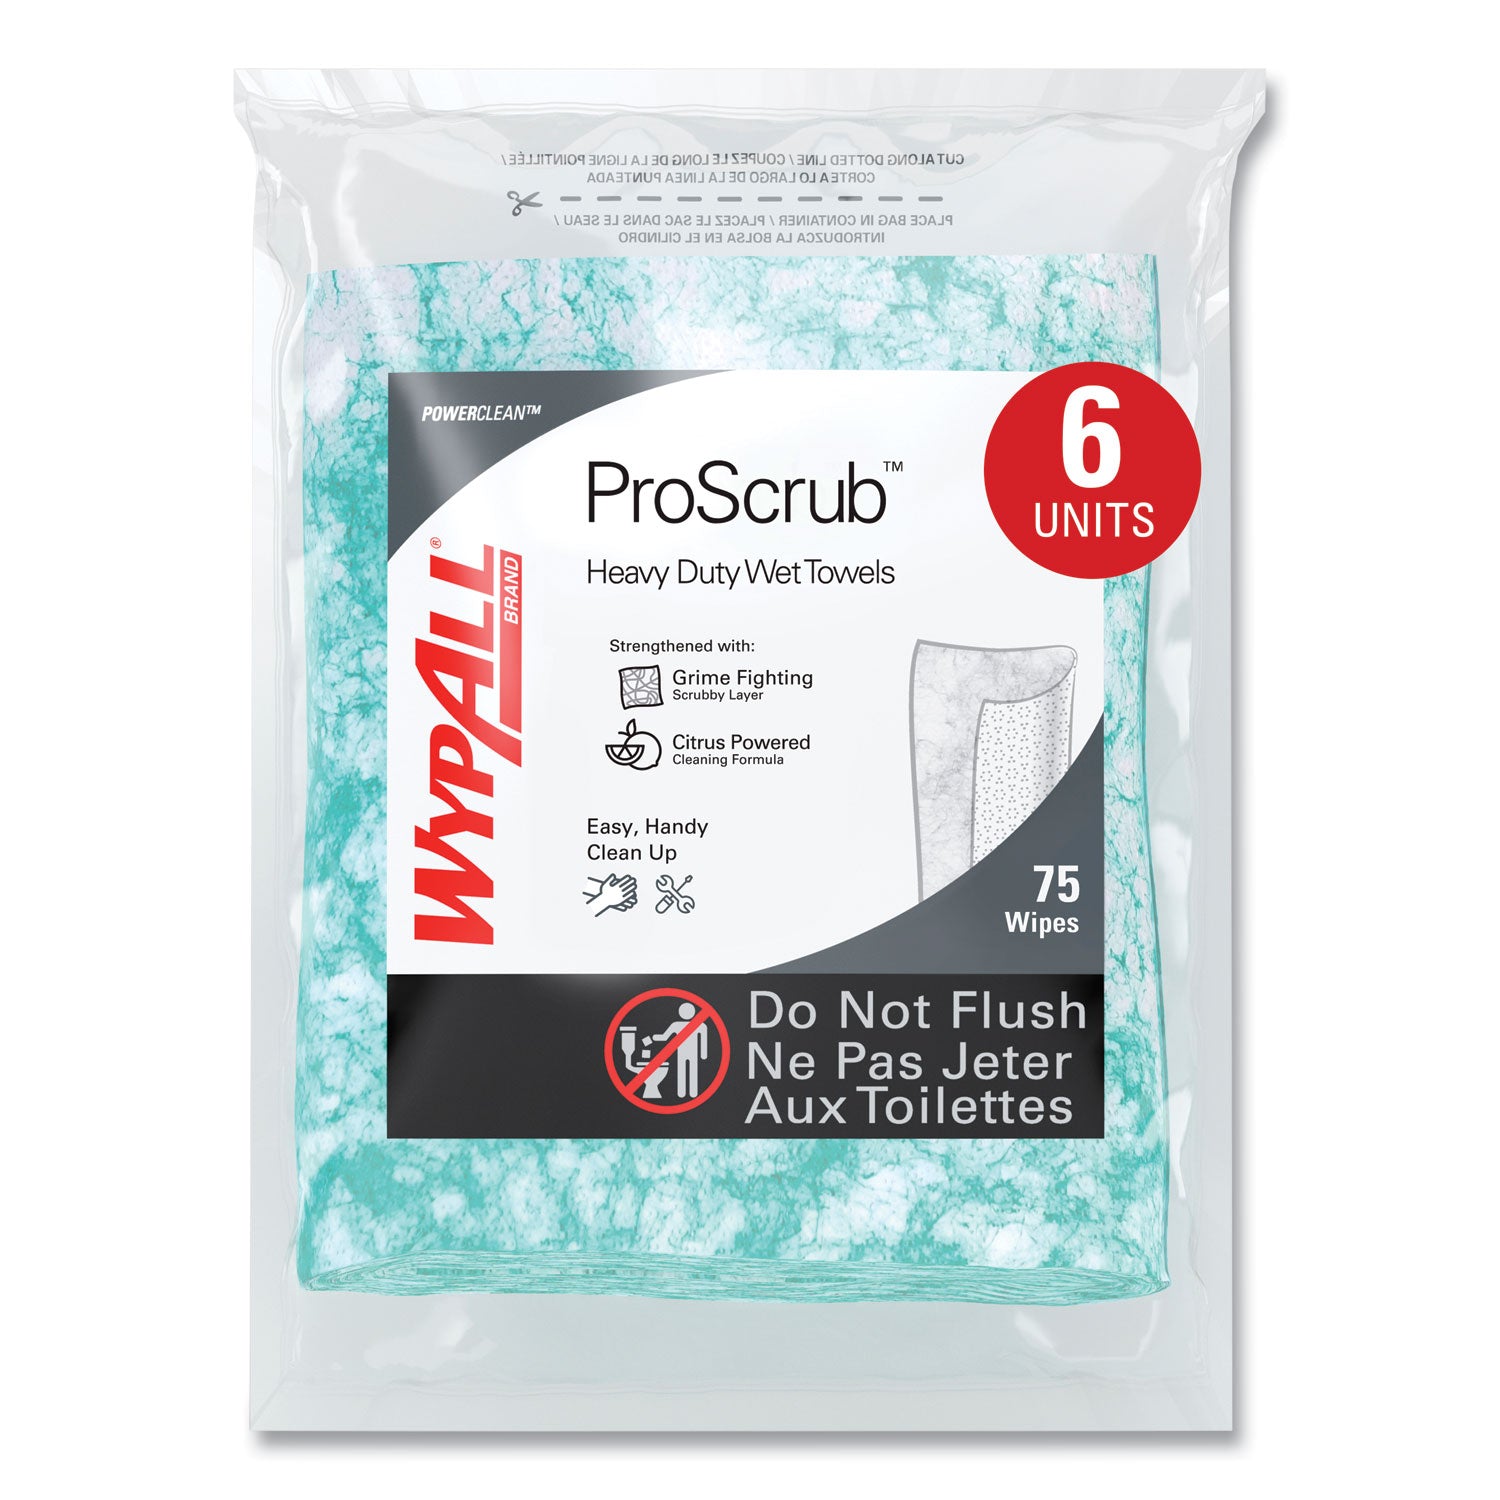 power-clean-proscrub-pre-saturated-wipes-12-x-95-citrus-scent-green-75-pack-6-packs-carton_kcc91367ct - 6